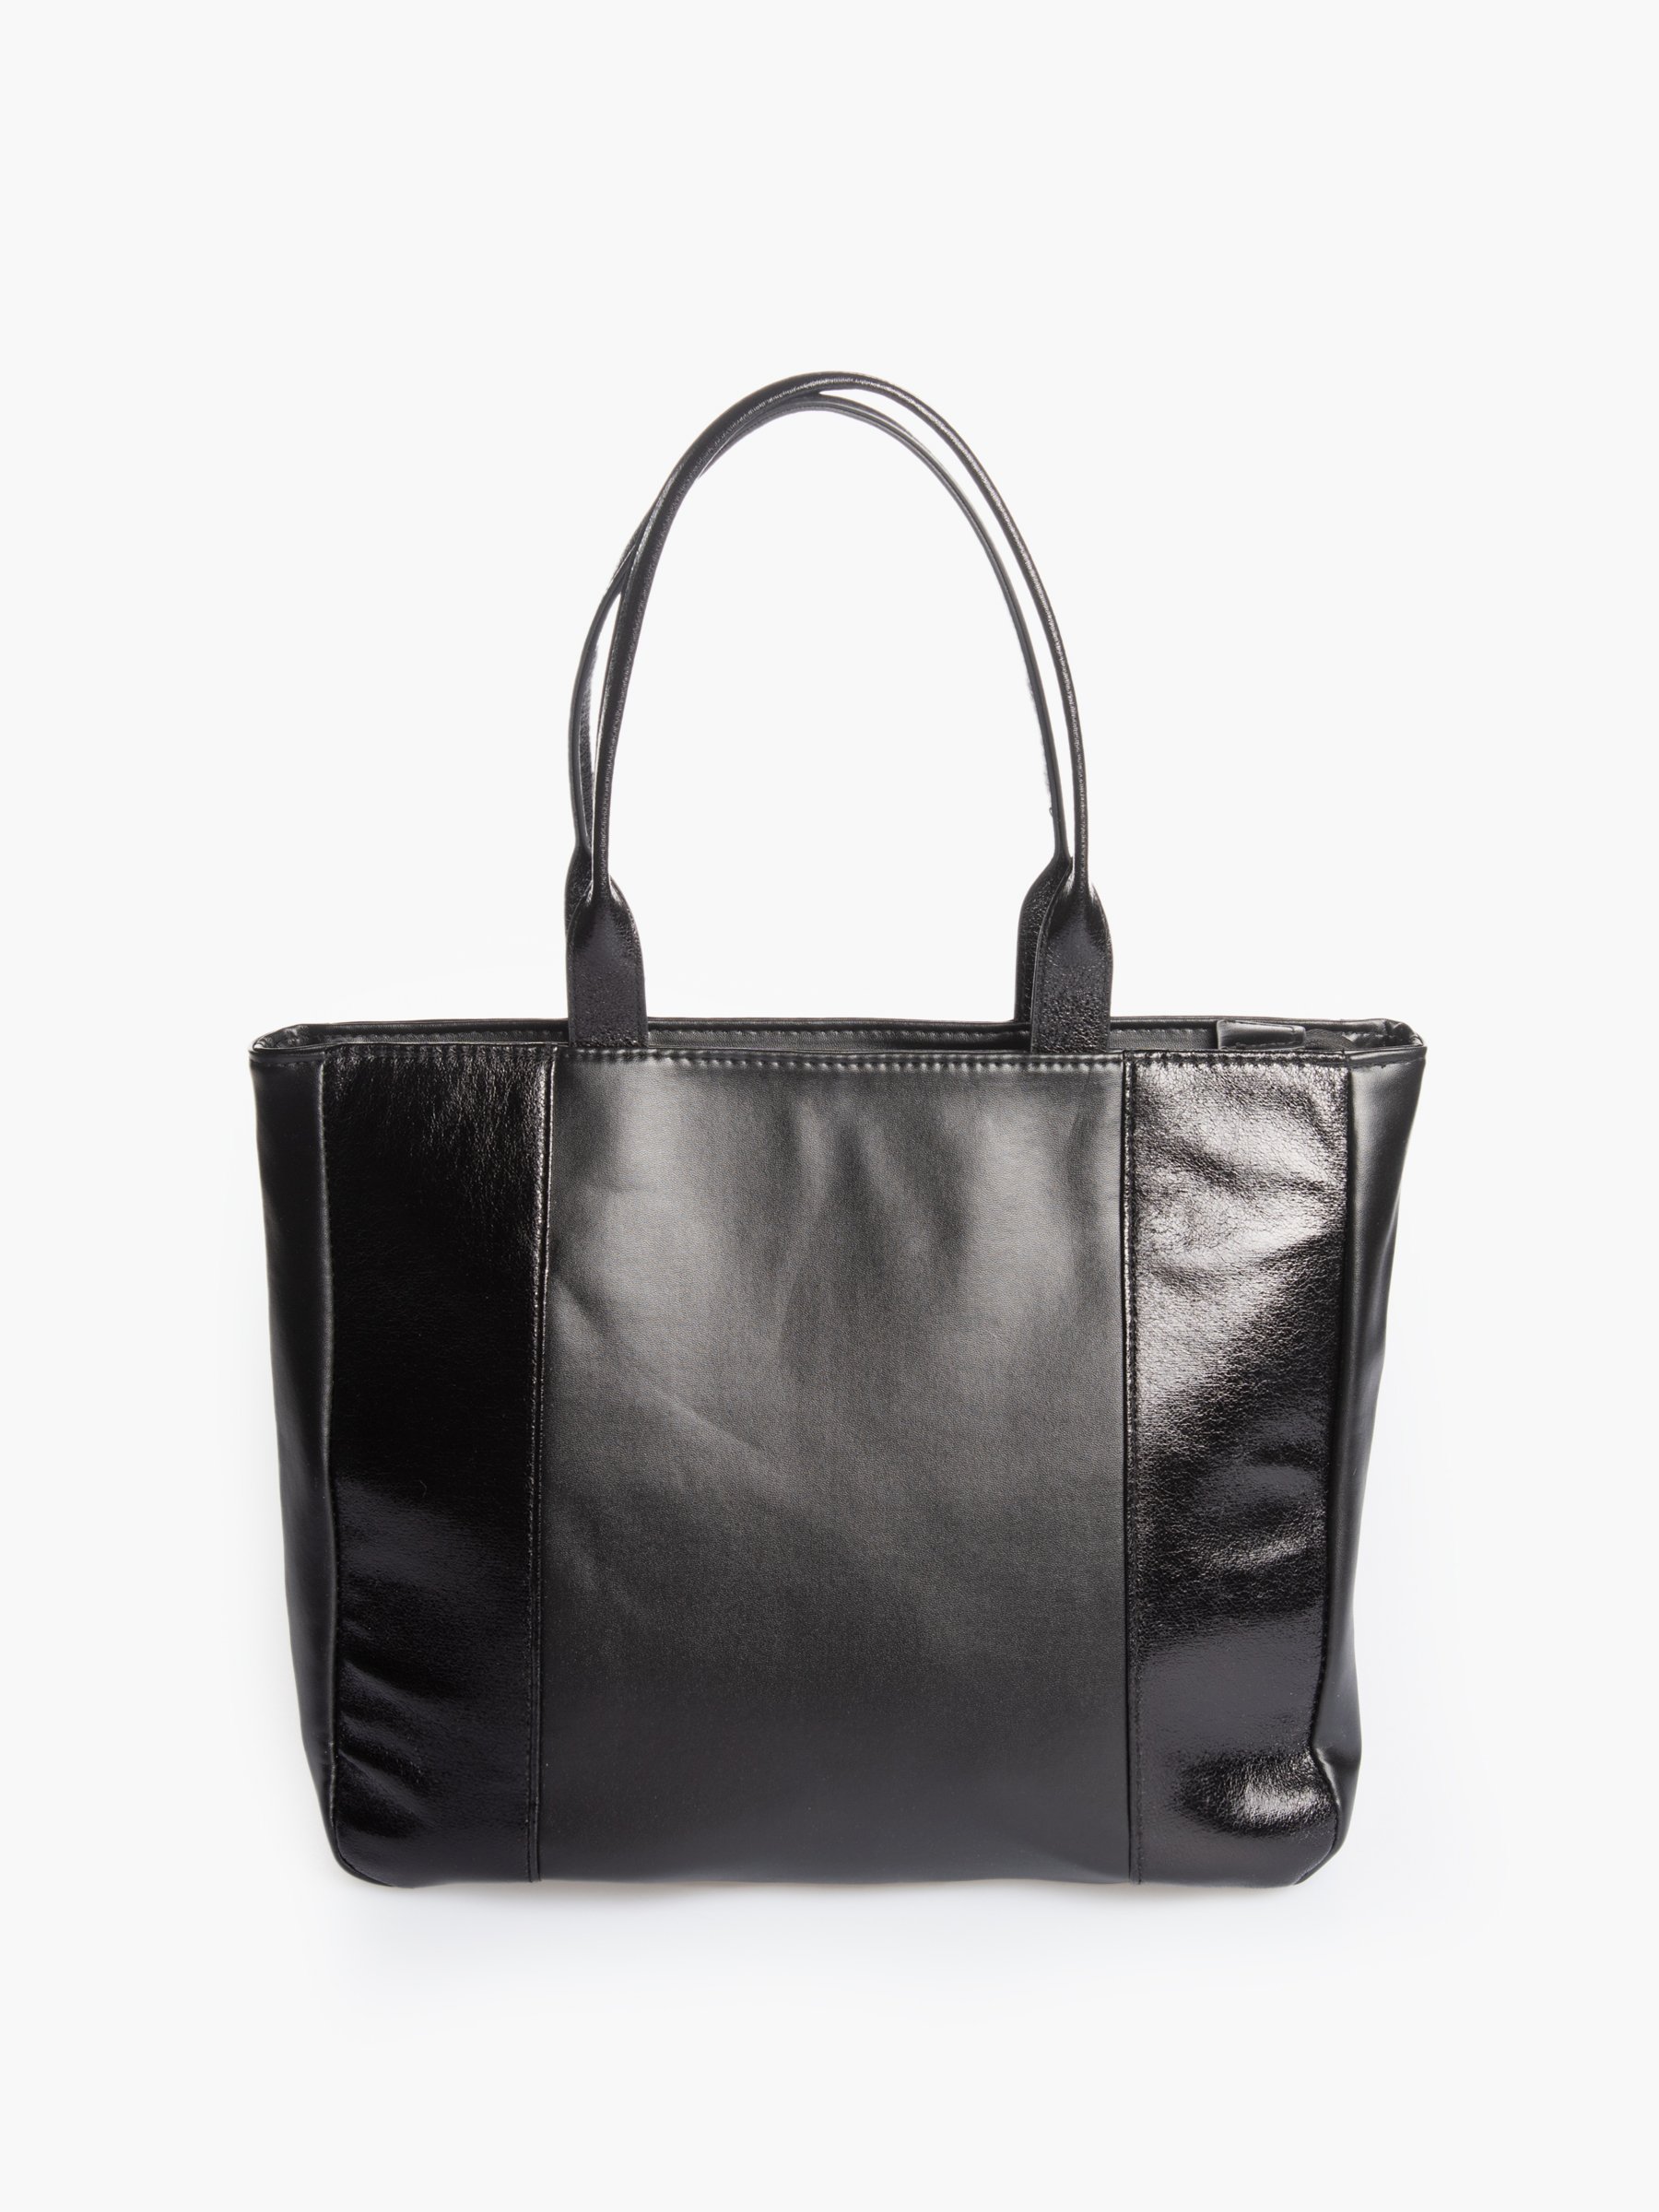 Non-Leather Handbags The Unknown Factory Women Non-Leather Handbag THE UNKNOWN FACTORY black Women Bags The Unknown Factory Women Non-Leather Bags The Unknown Factory Women Non-Leather Handbags The Unknown Factory Women 